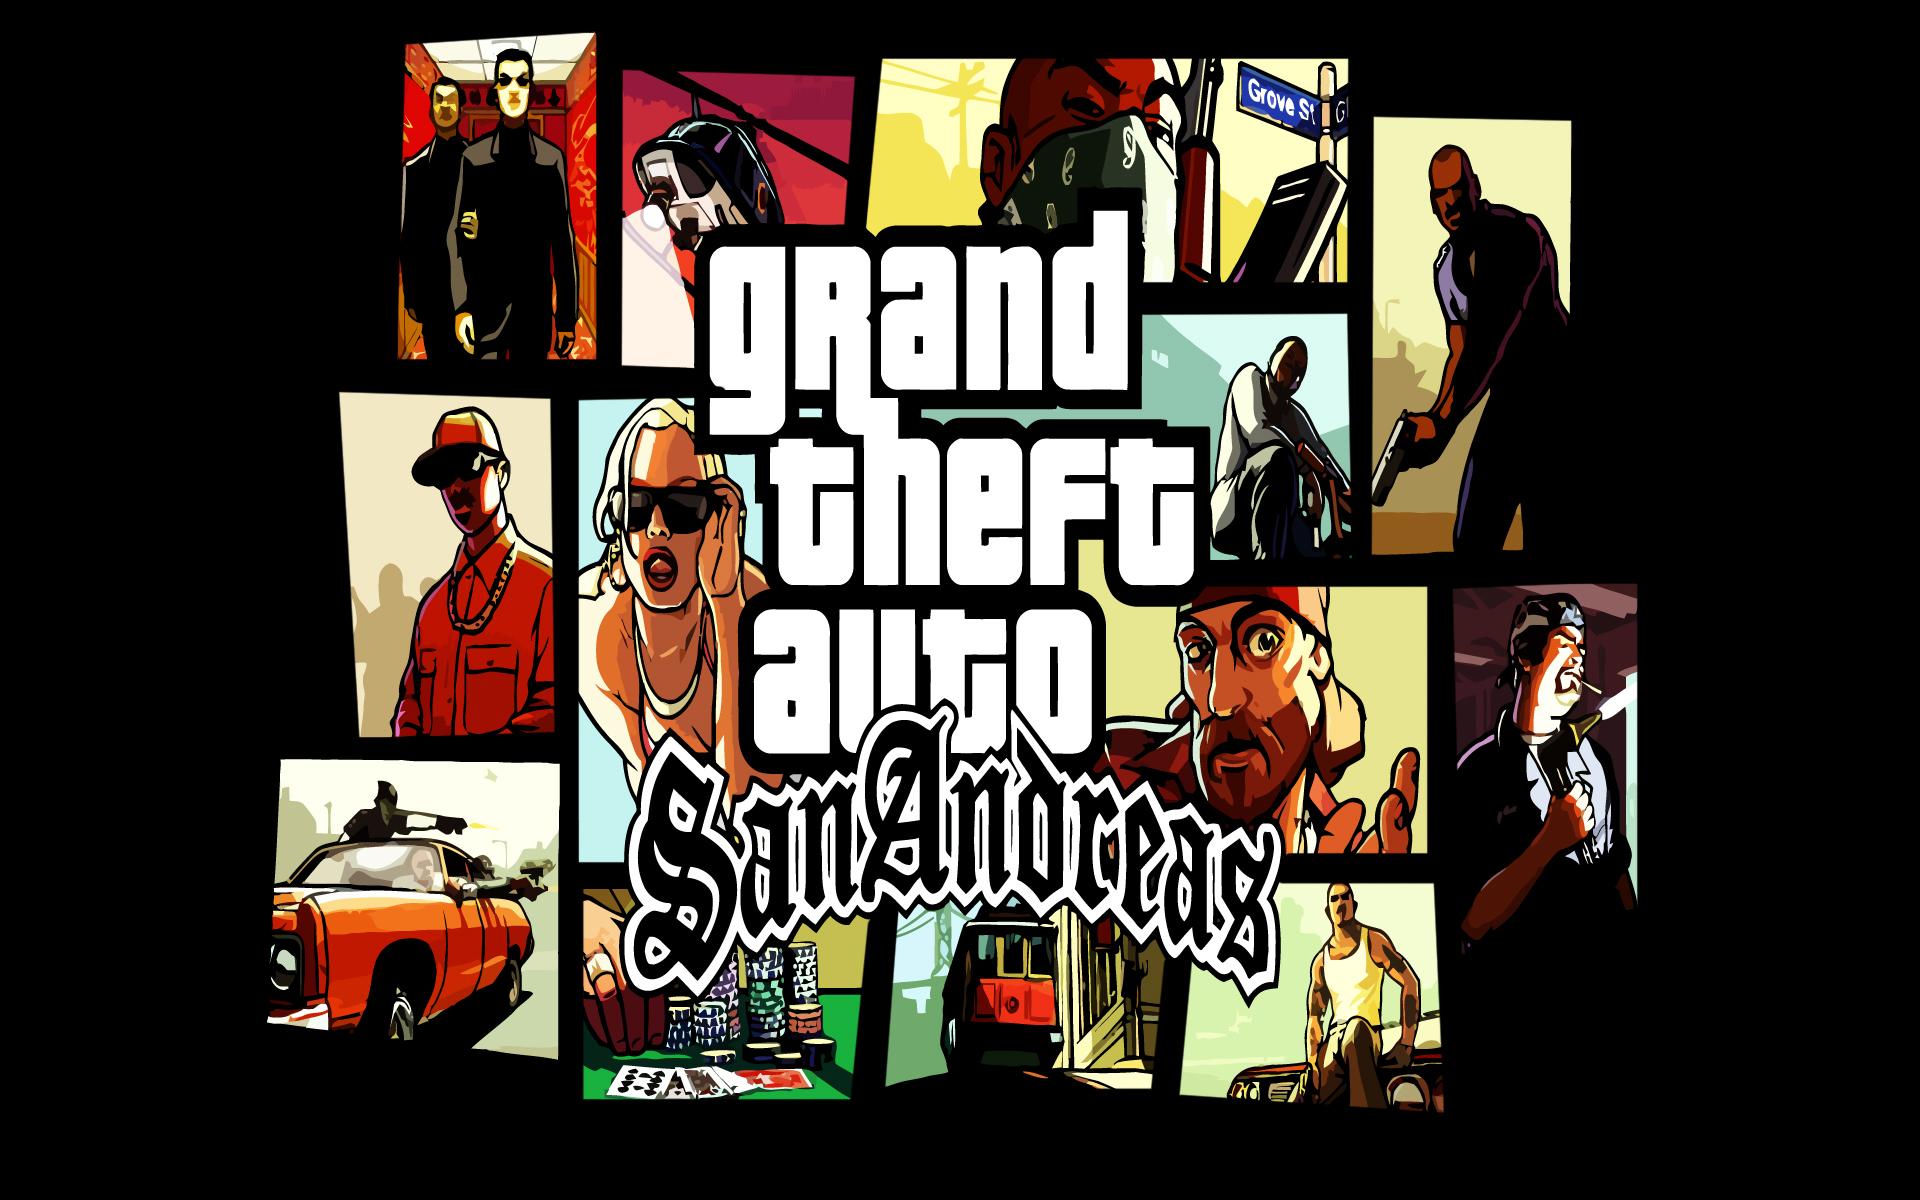 Awesome Grand Theft Auto San Andreas Image & Wallpaper Babatunde